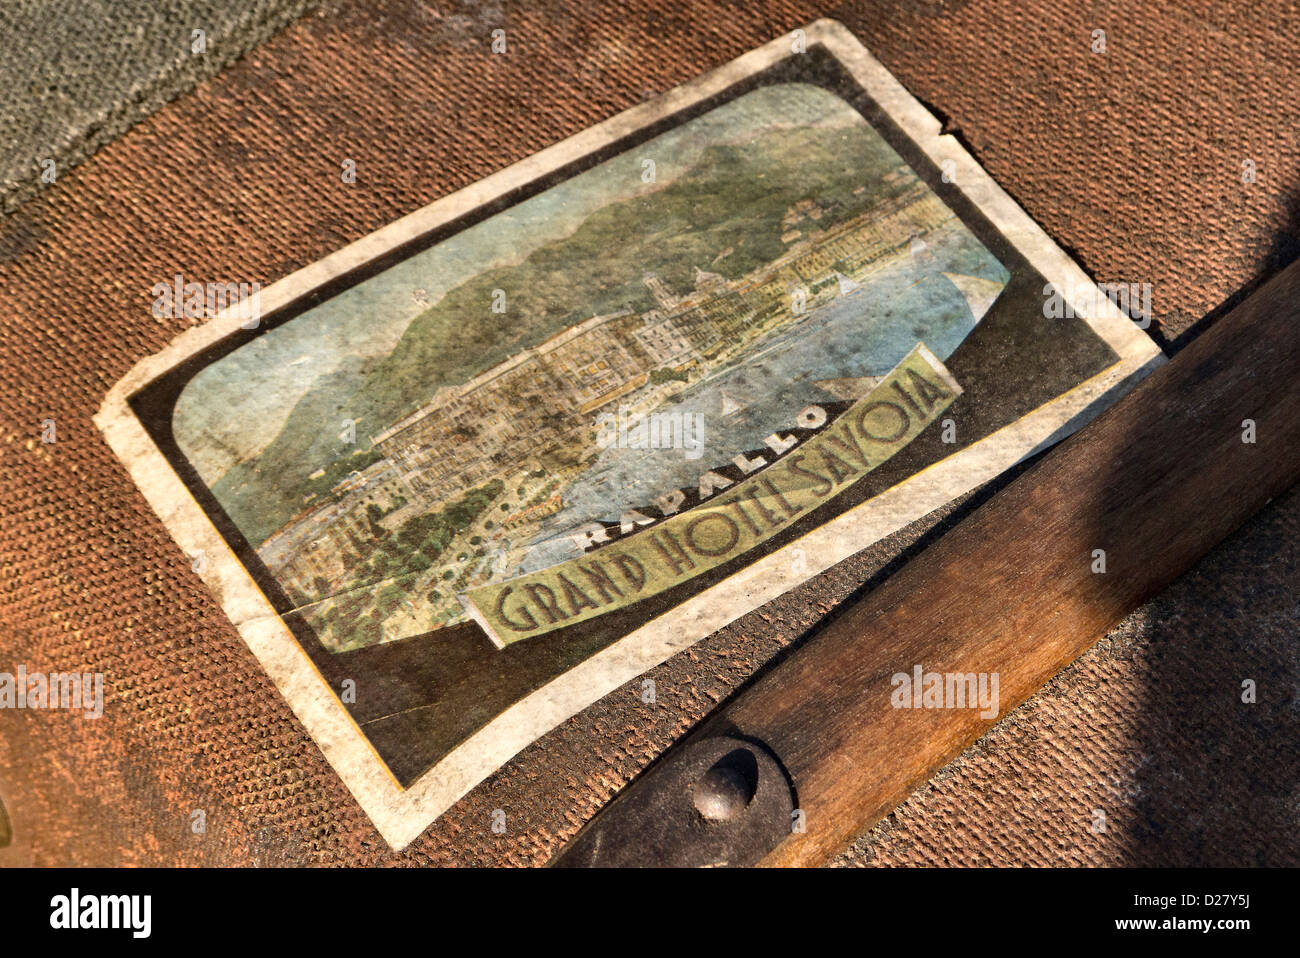 1930's hotel label for the Grand Hotel Savoia stuck to a on a vintage suitcase. Stock Photo